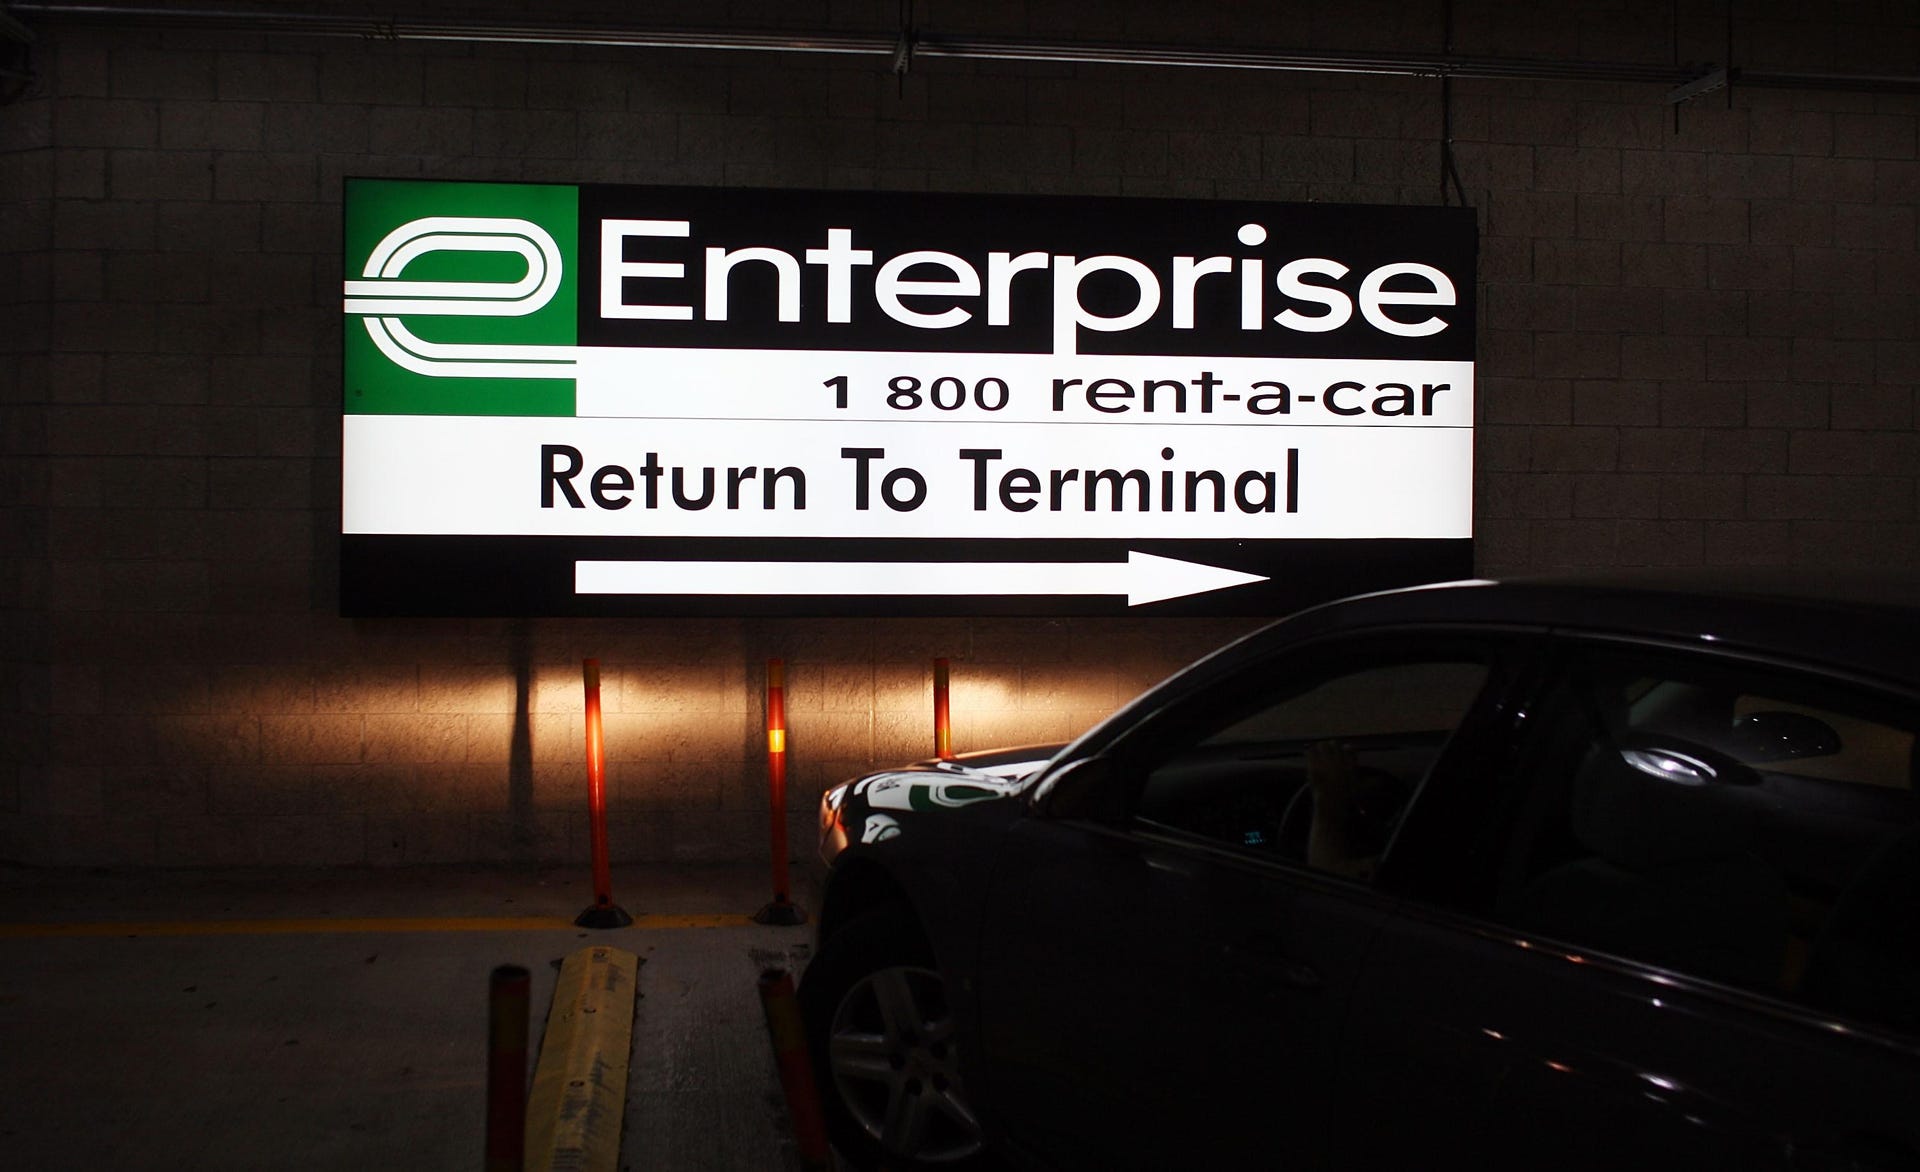 Enterprise Challenges Hertz With Acquisition Of National And Alamo